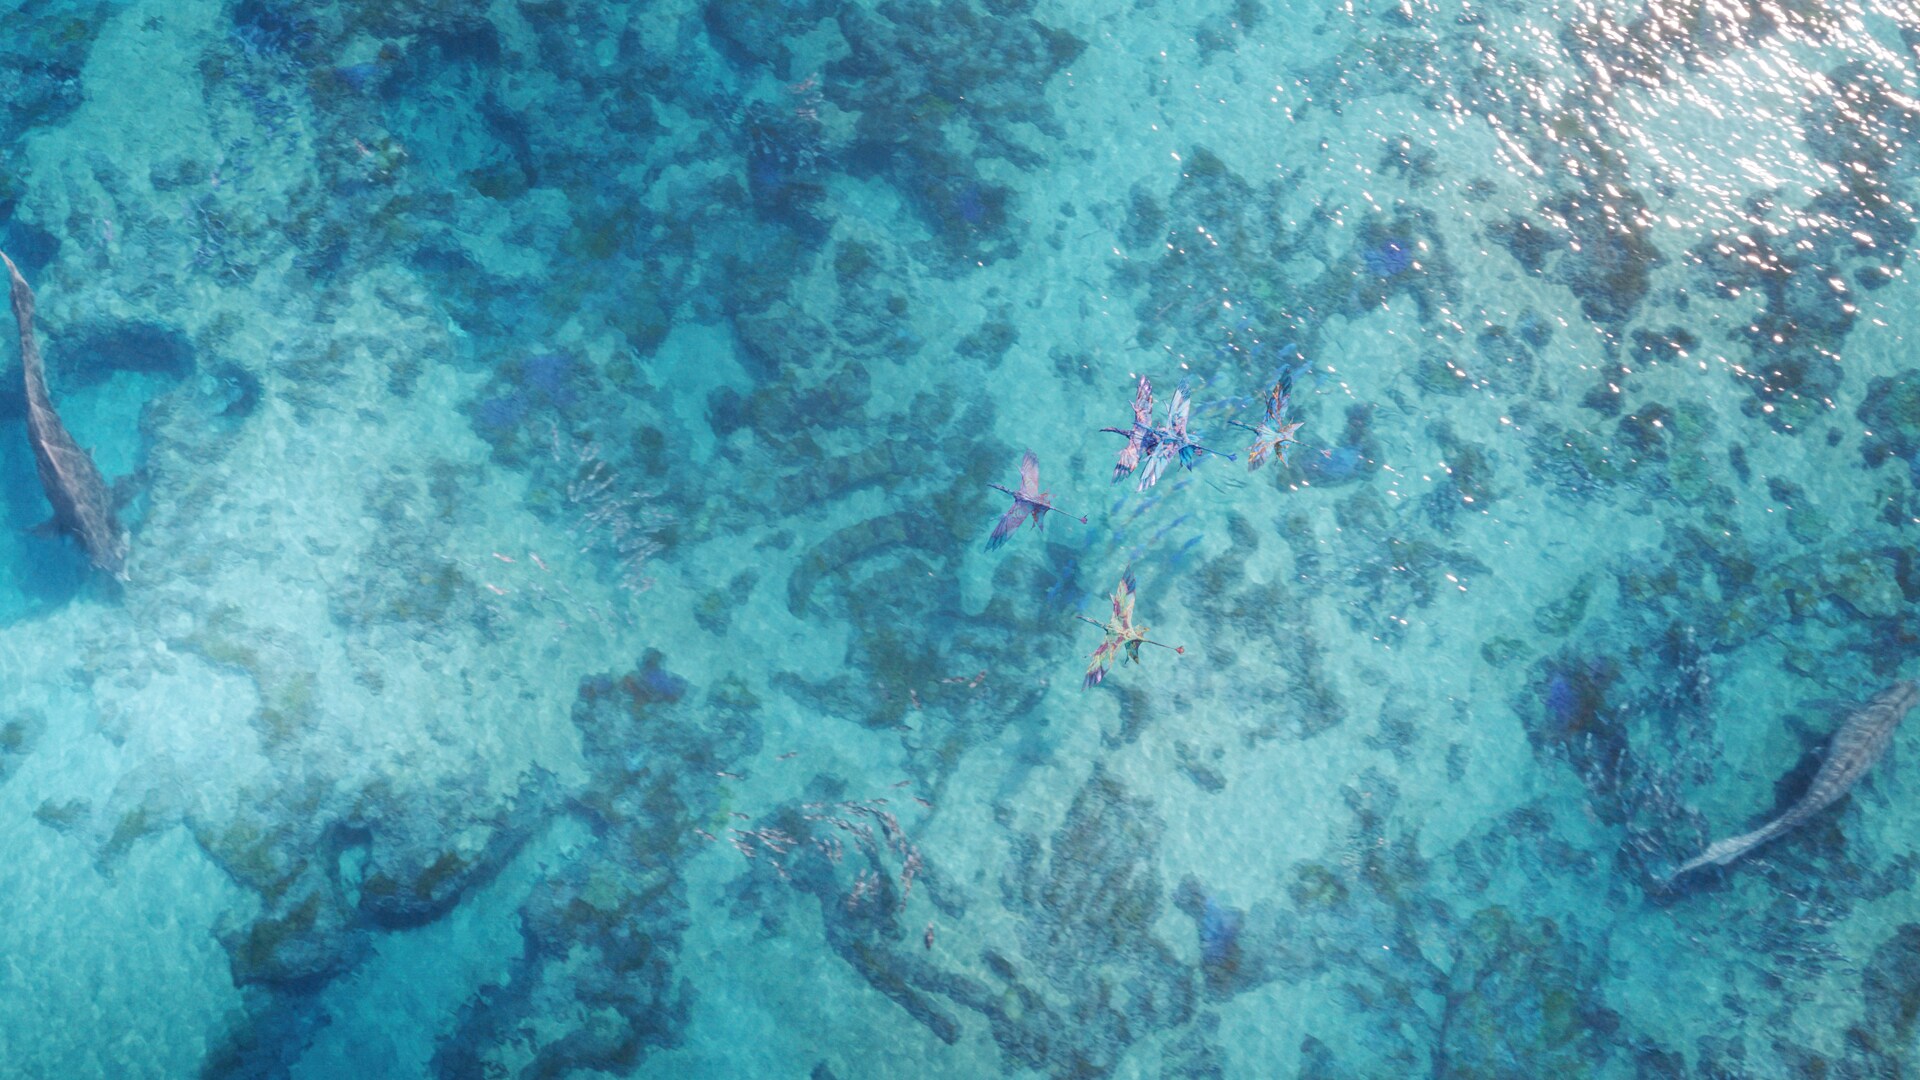 Several Na'vi riding banshees over a body of water with two large creatures visible underwater. From the movie, "Avatar: The Way of Water."